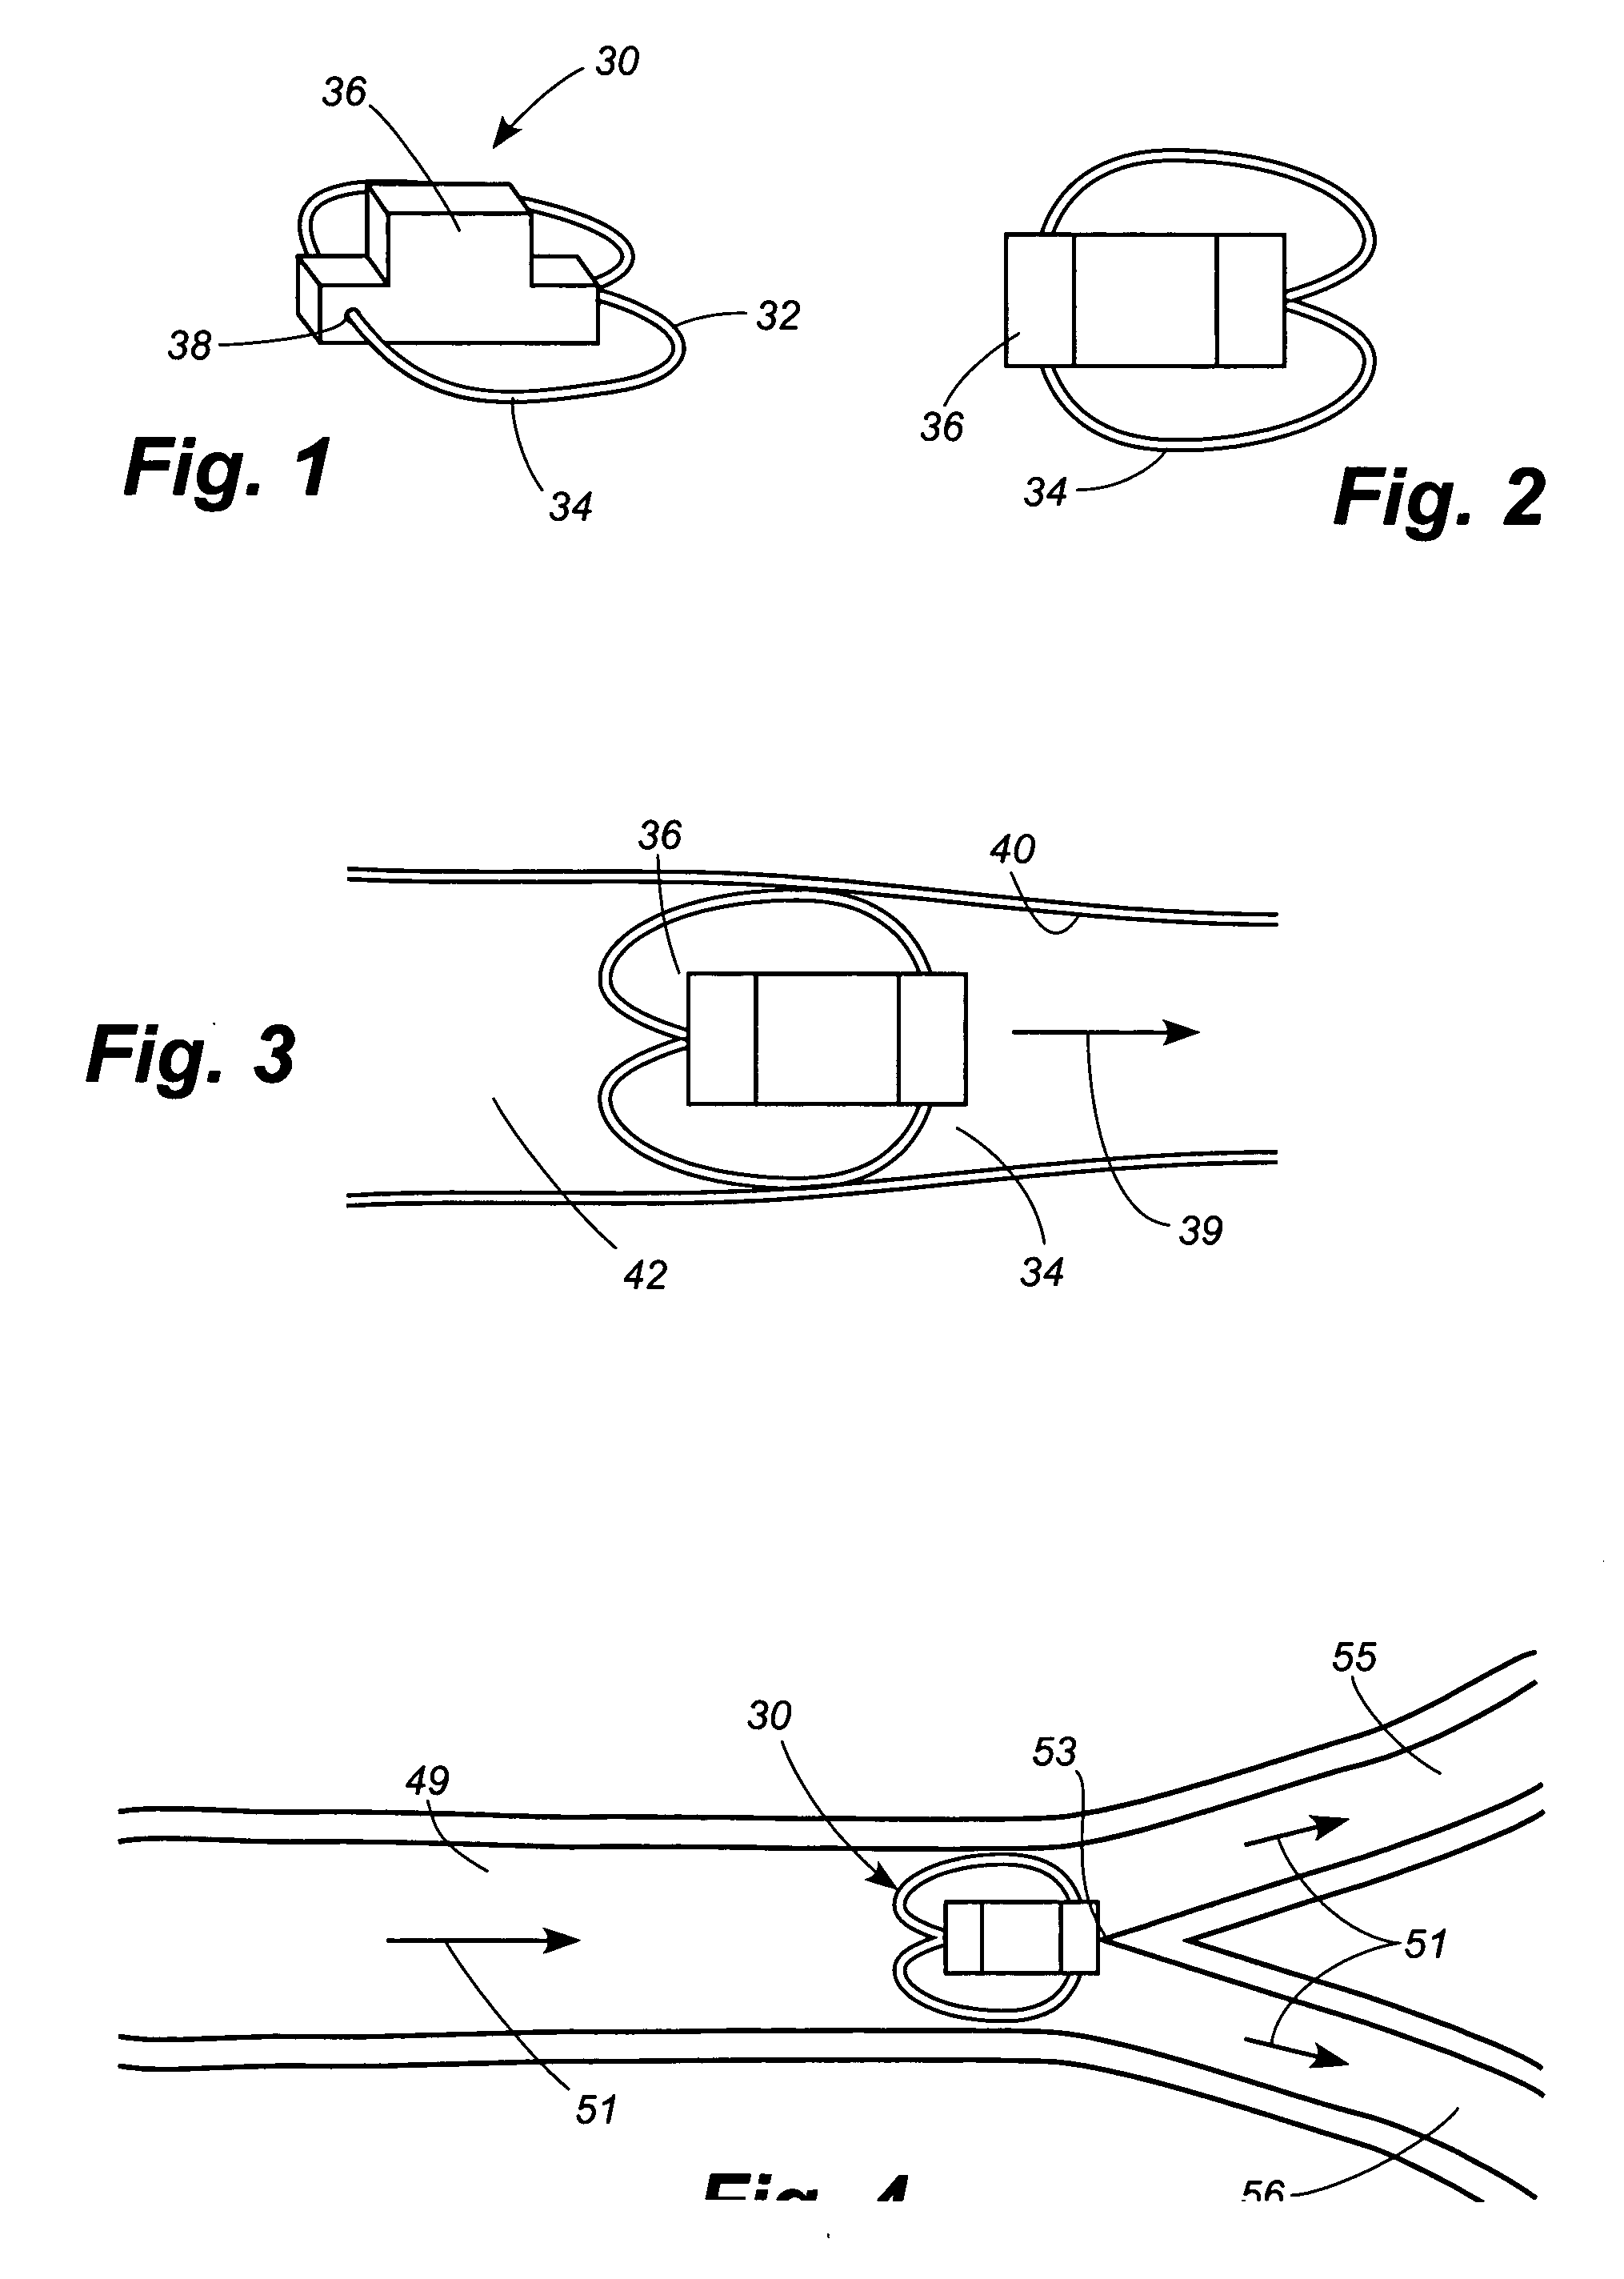 Apparatus and method for sensor deployment and fixation